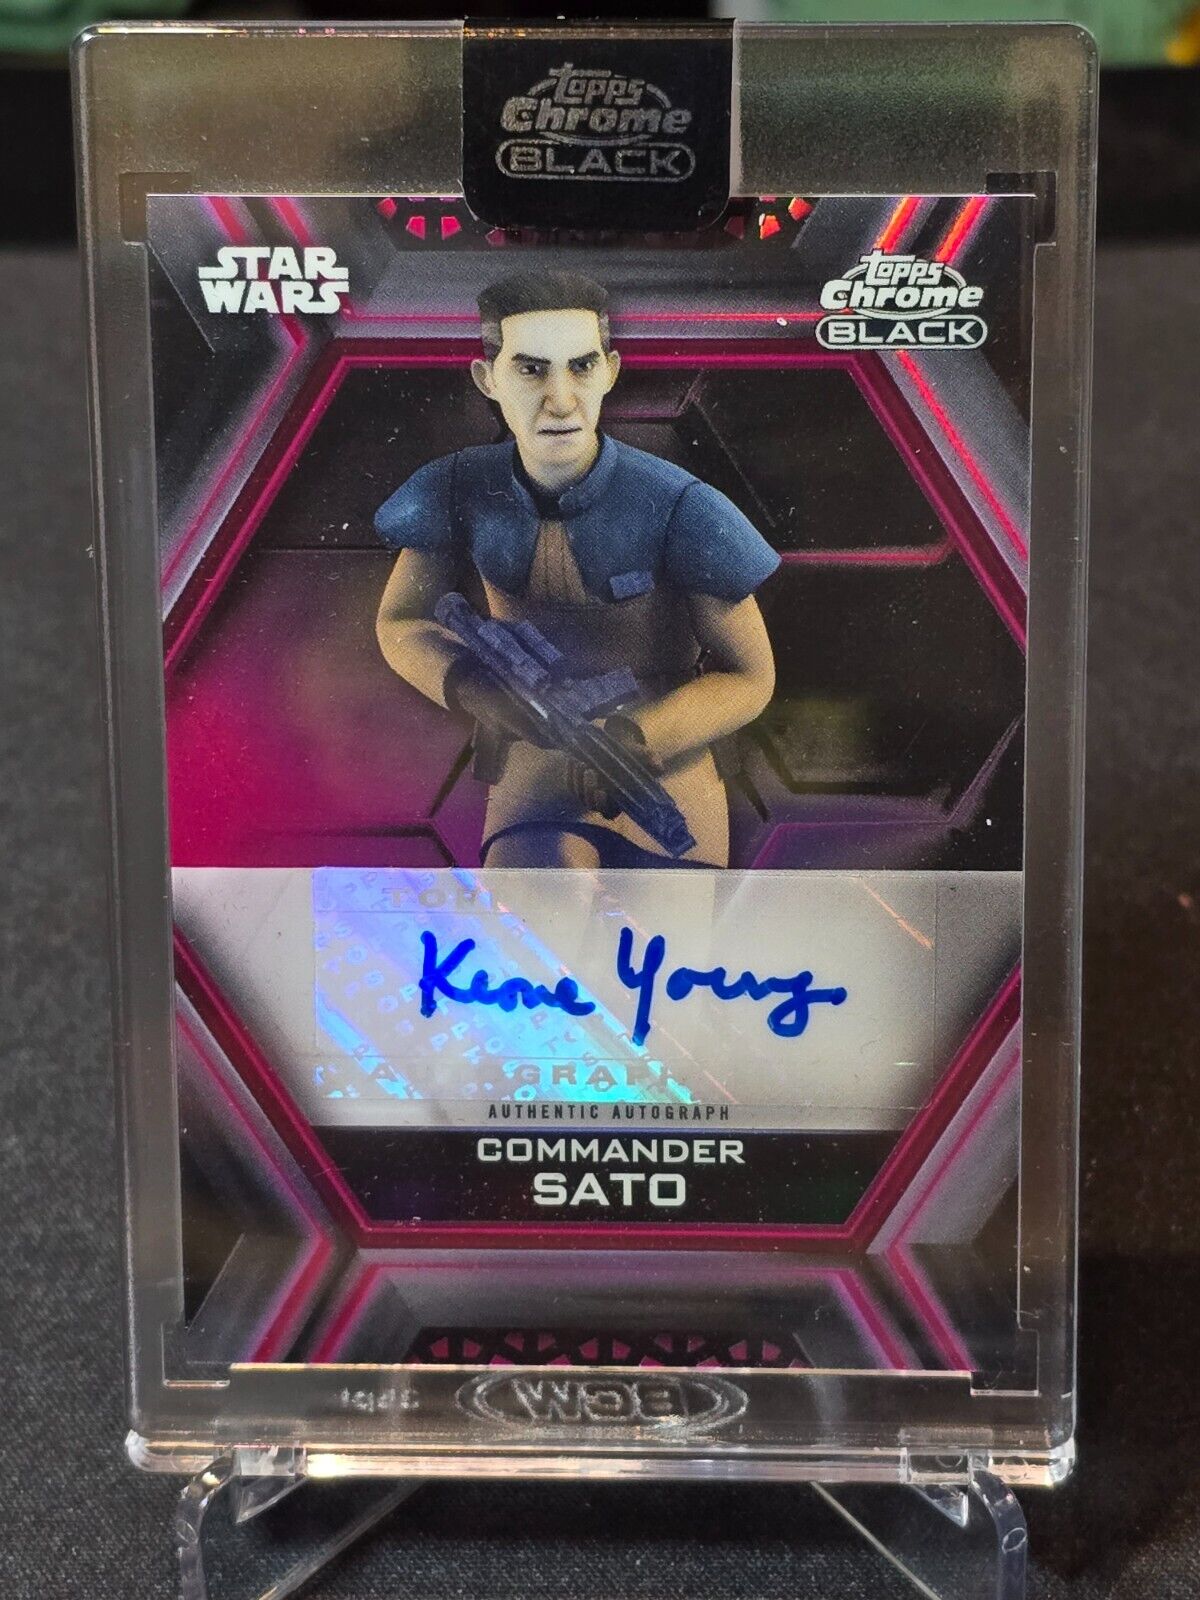 2022 Topps Chrome Black Red Refractor Auto - Commander Sato (Keone Young) 4/5